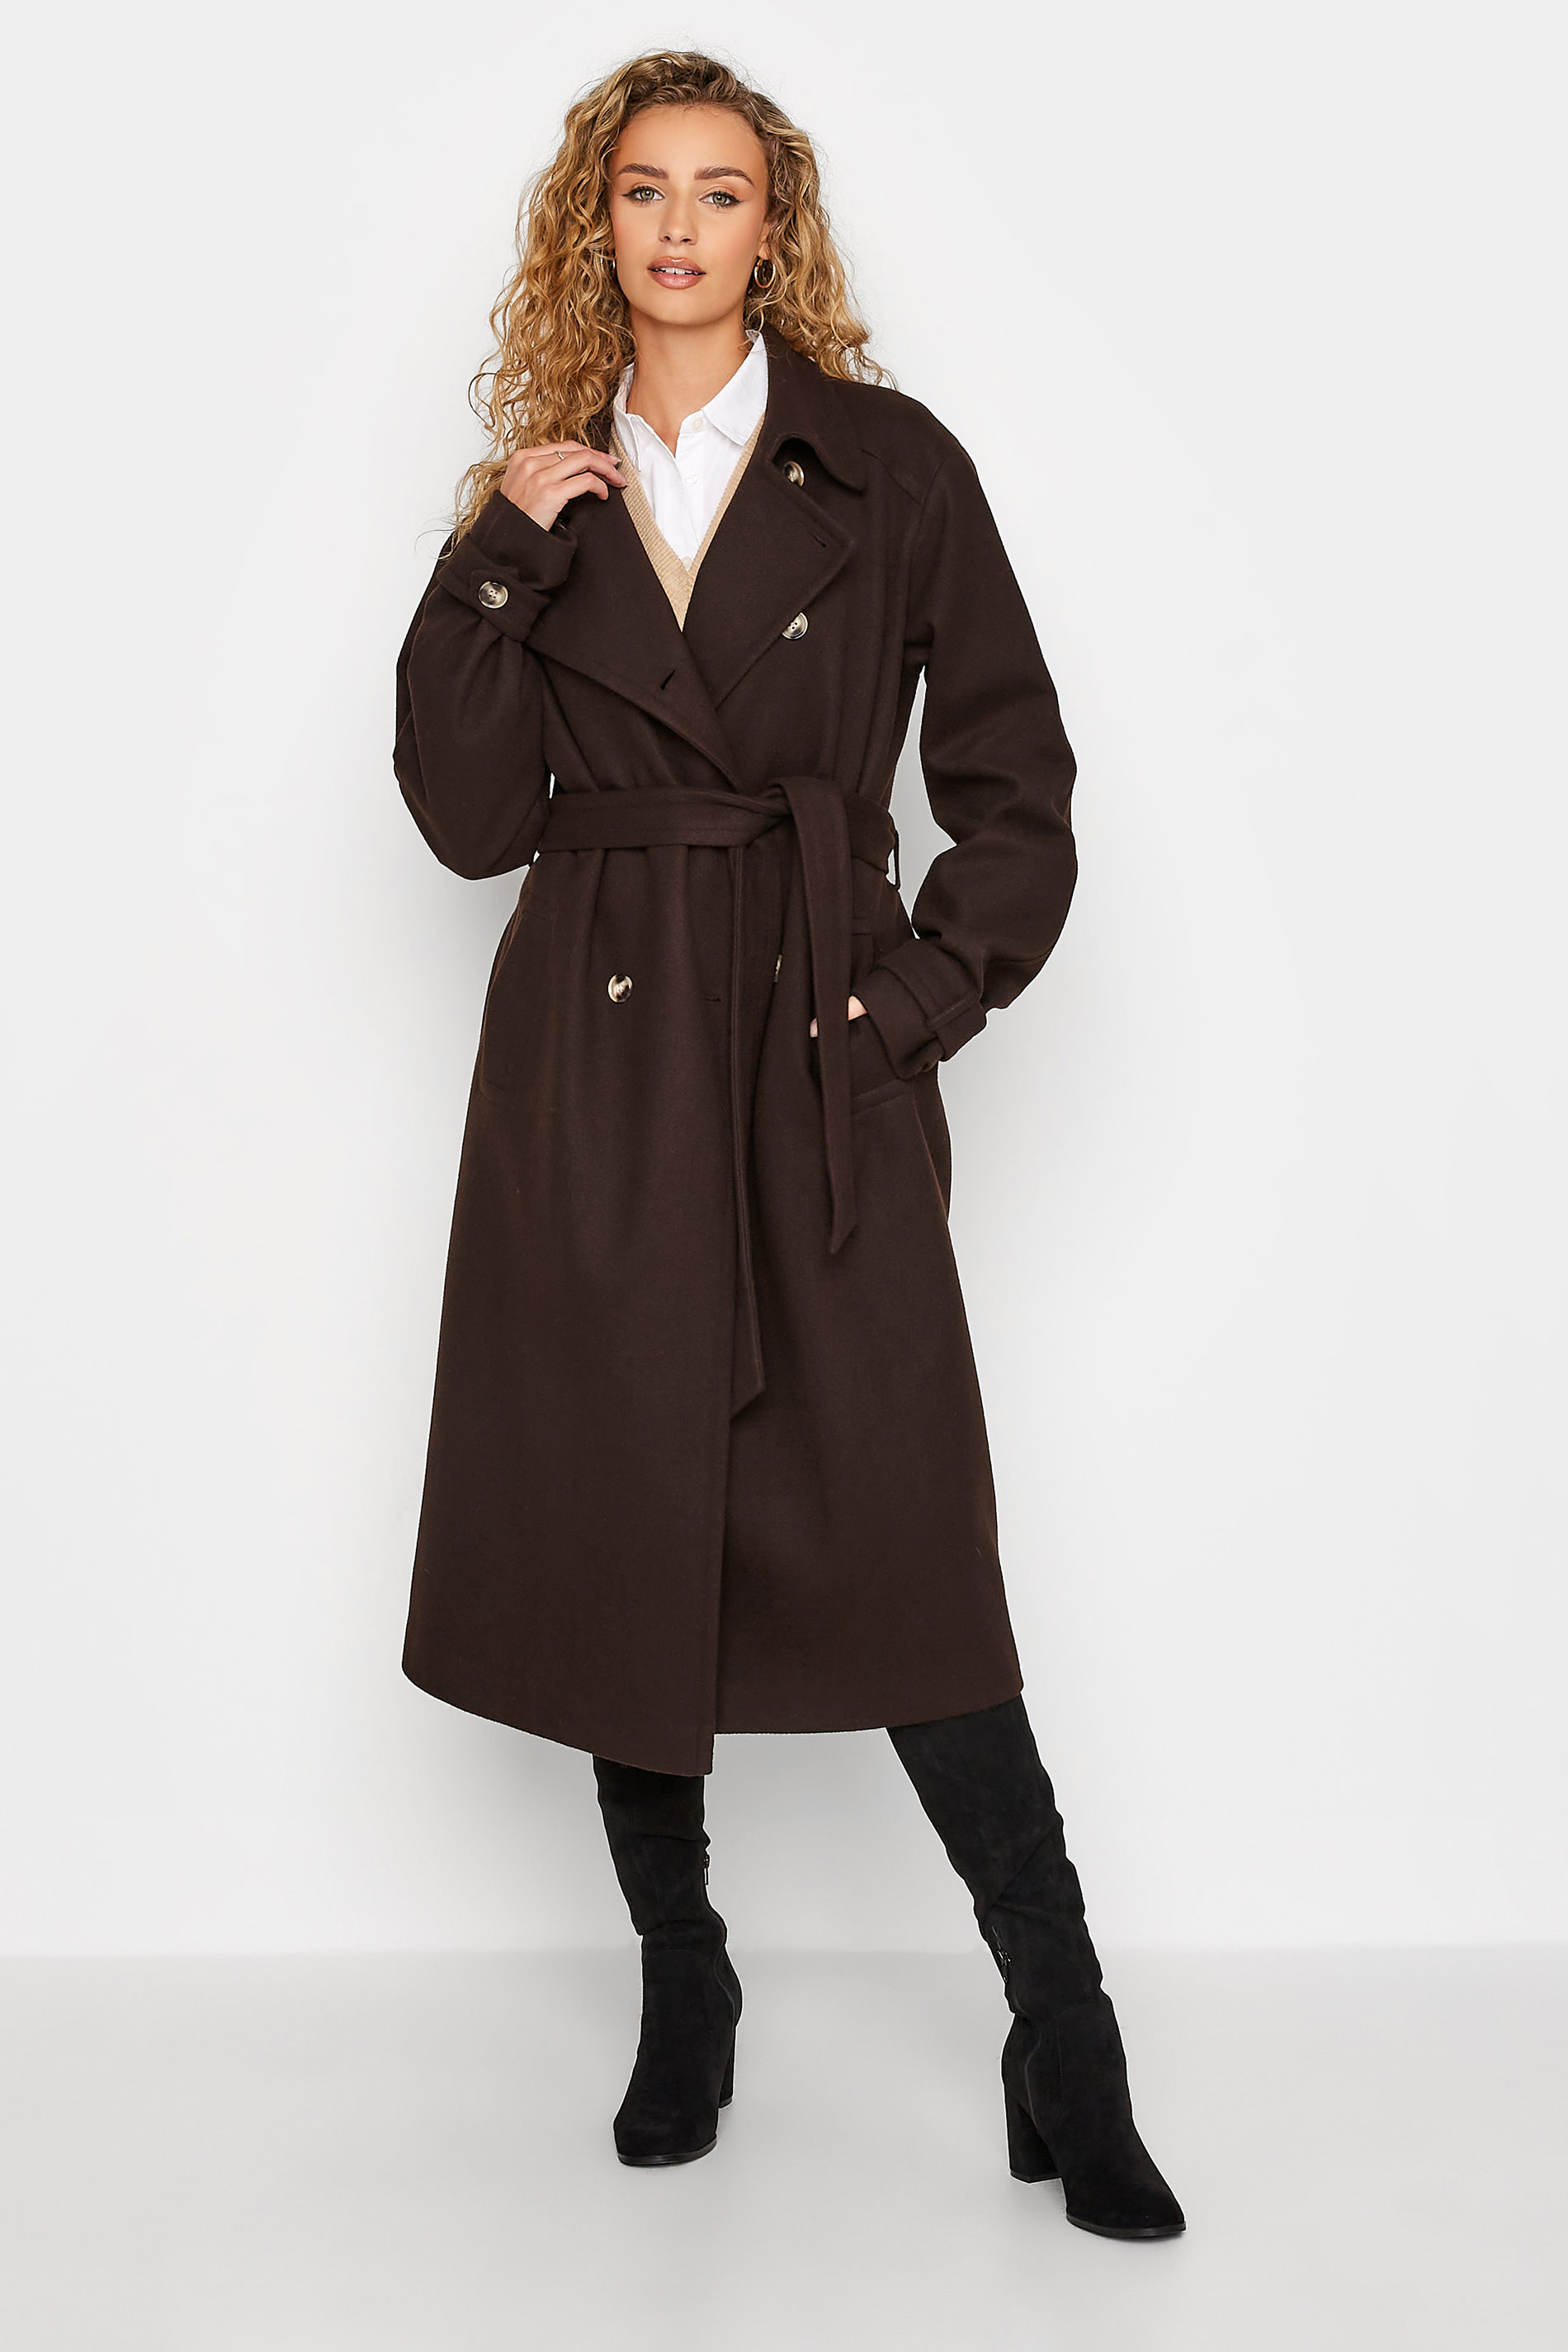 LTS Tall Womens Chocolate Brown Formal Trench Coat | Long Tall Sally 1